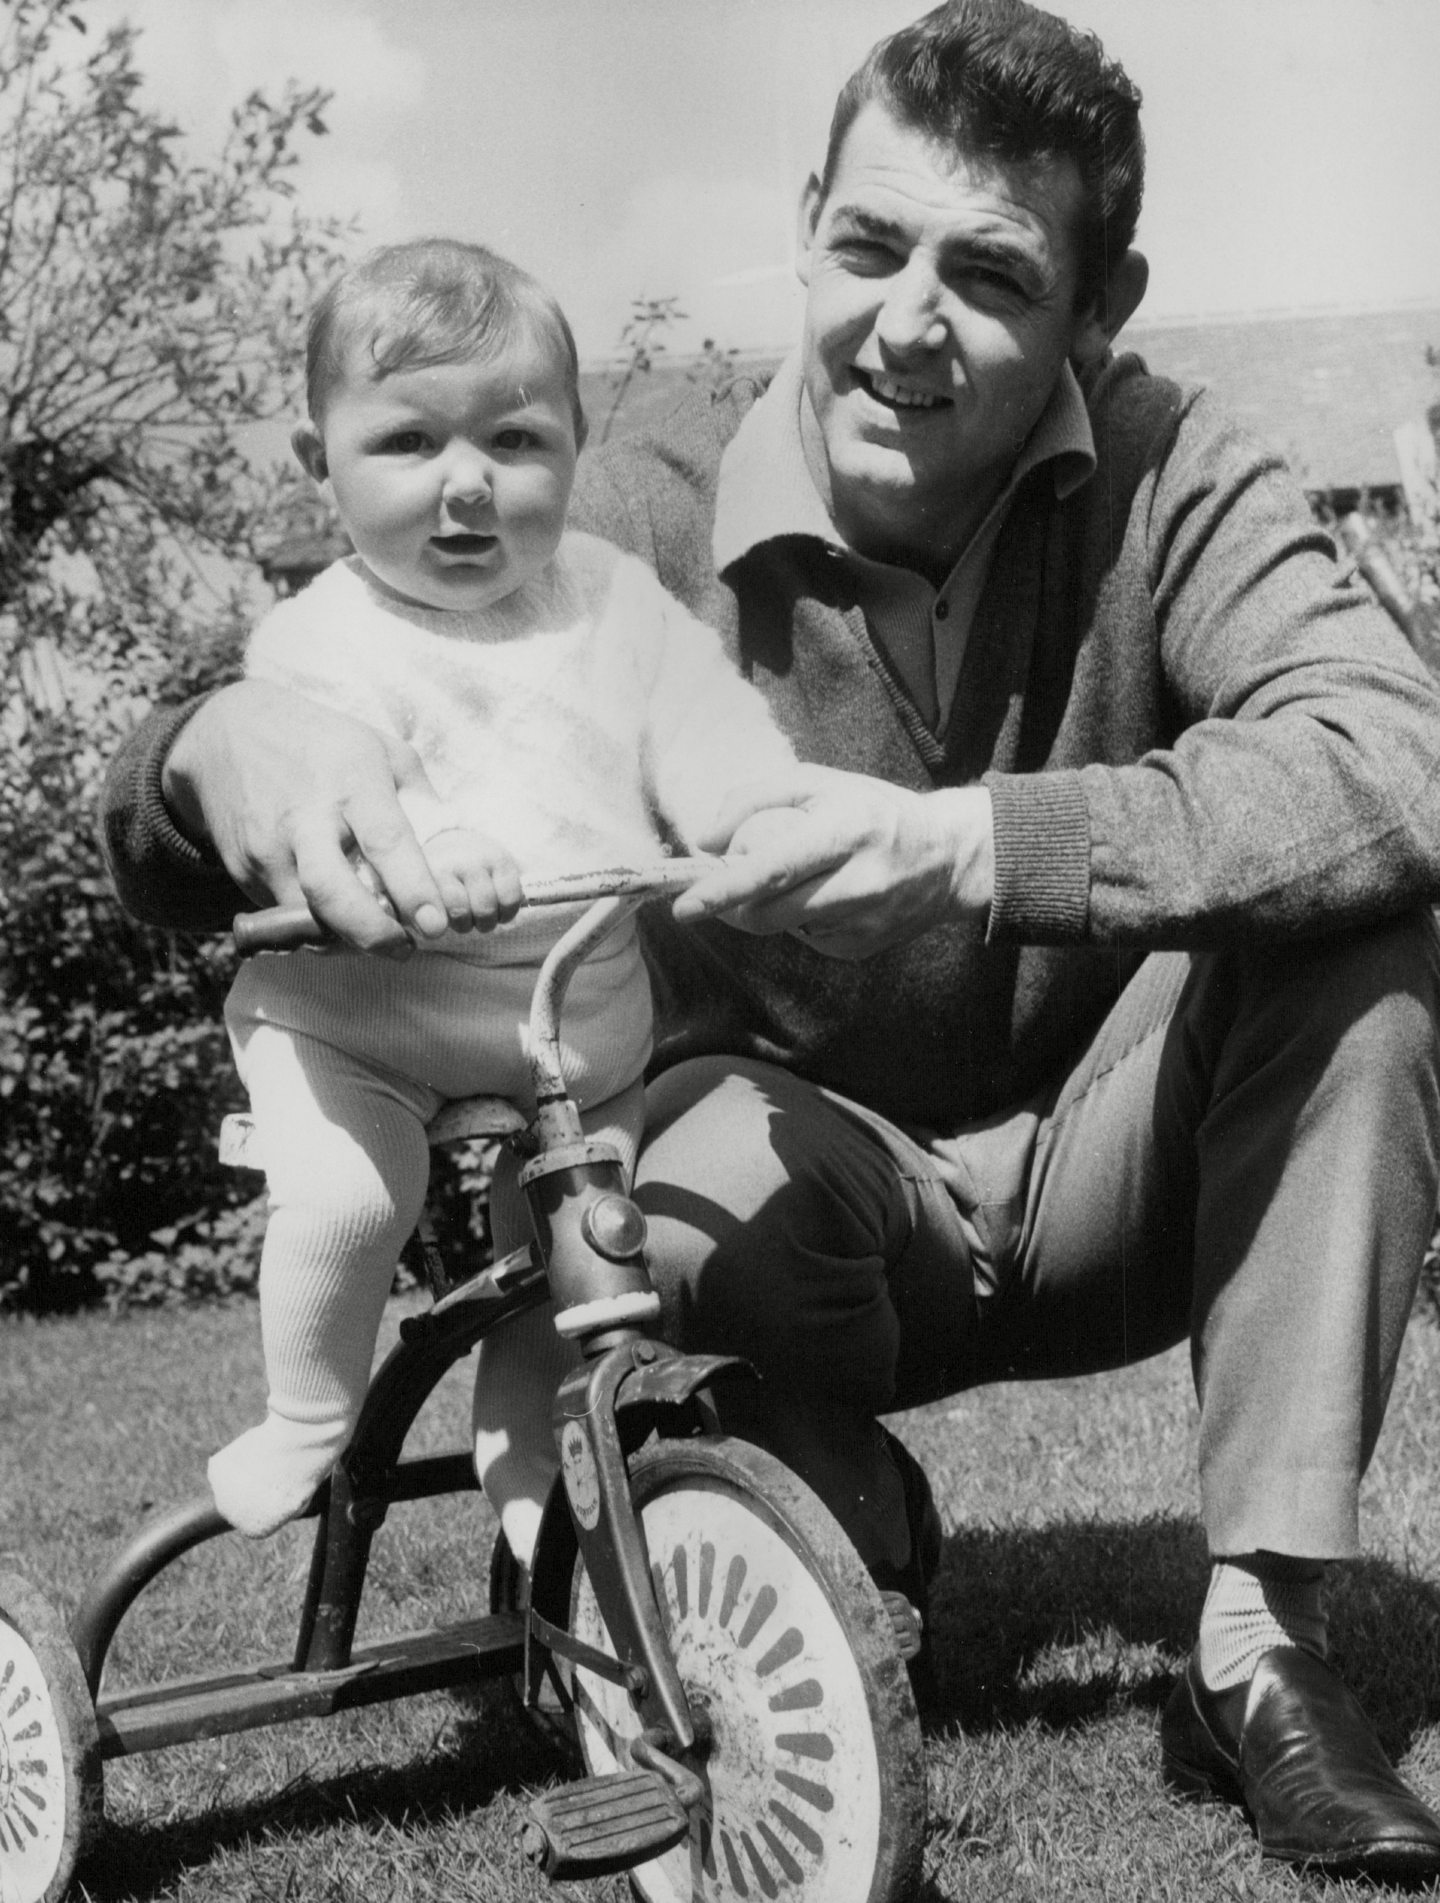 Adam Blacklaw kneeling next to his daughter Jane who is sitting on a tricycle